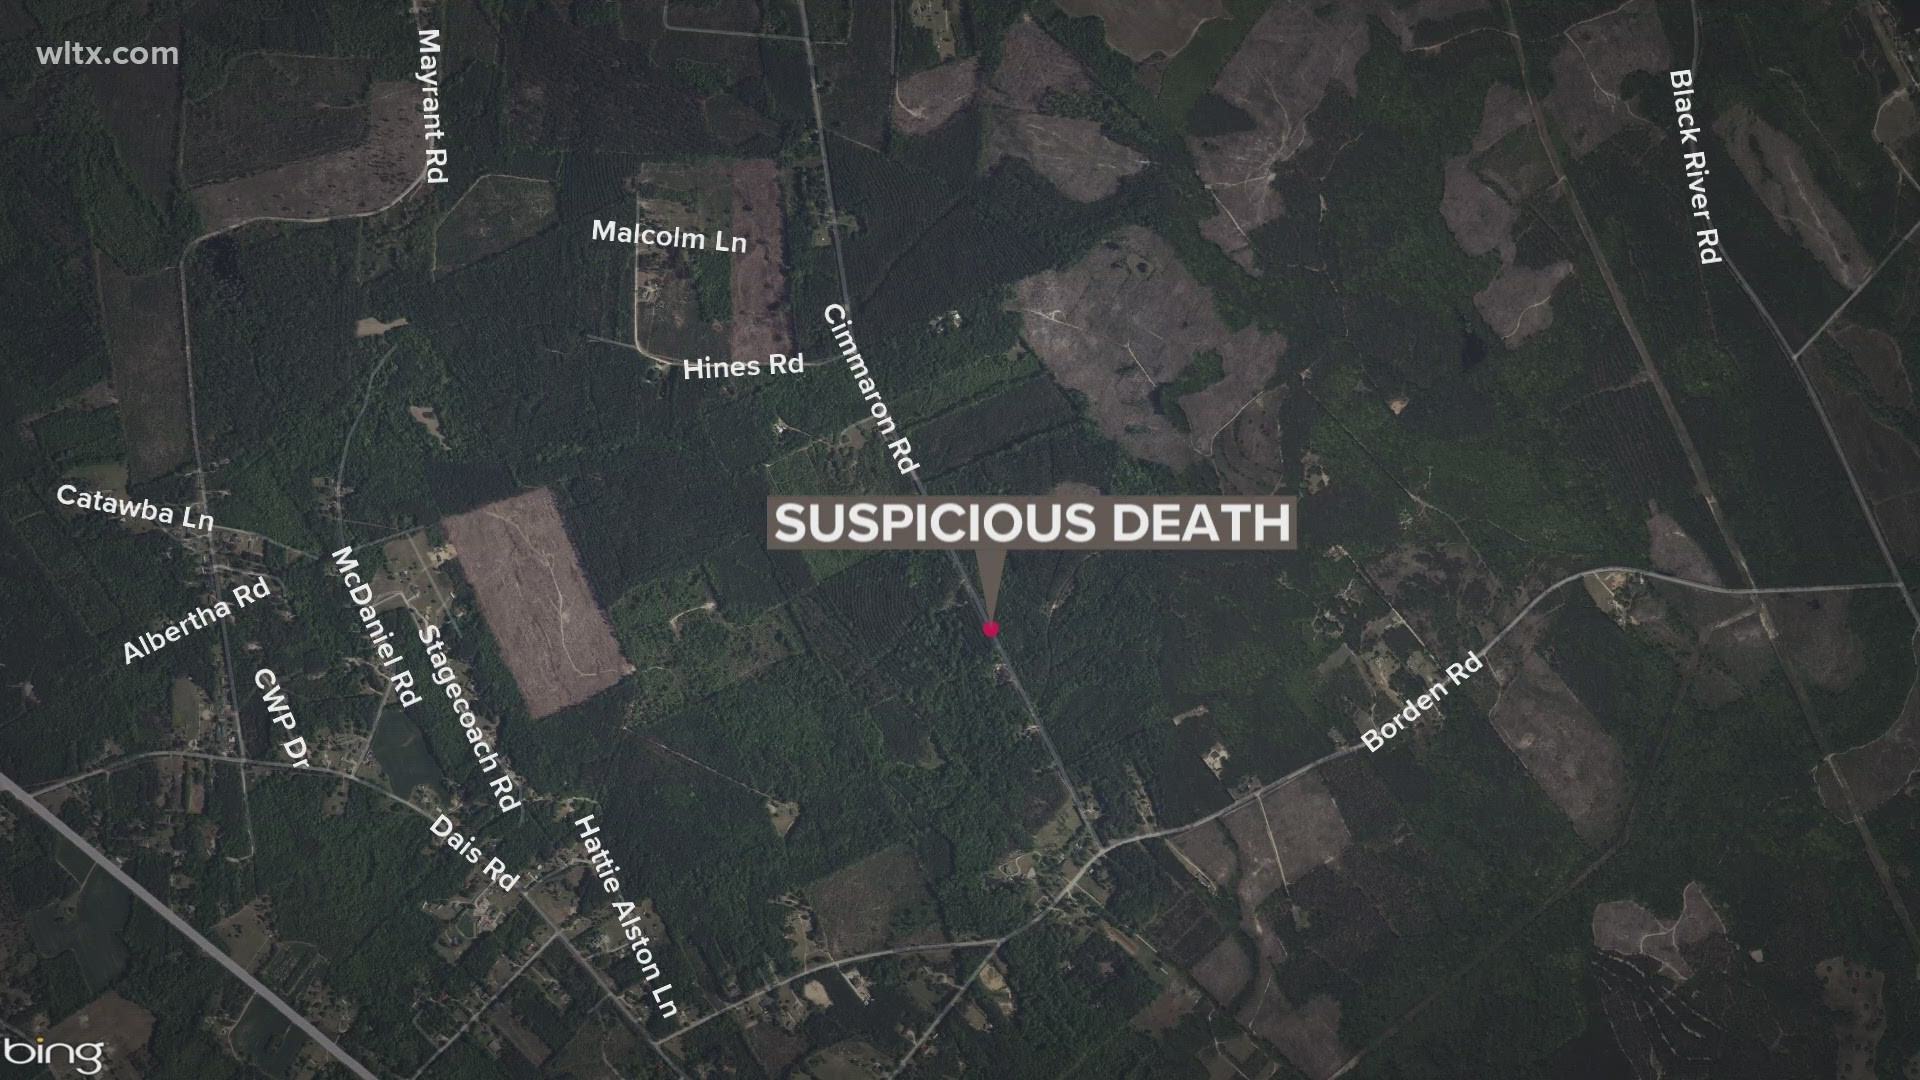 Multiple agencies are investigating a suspicious death in Sumter County after a group of hunters discovered a body wrapped in a tarp off a rural road.